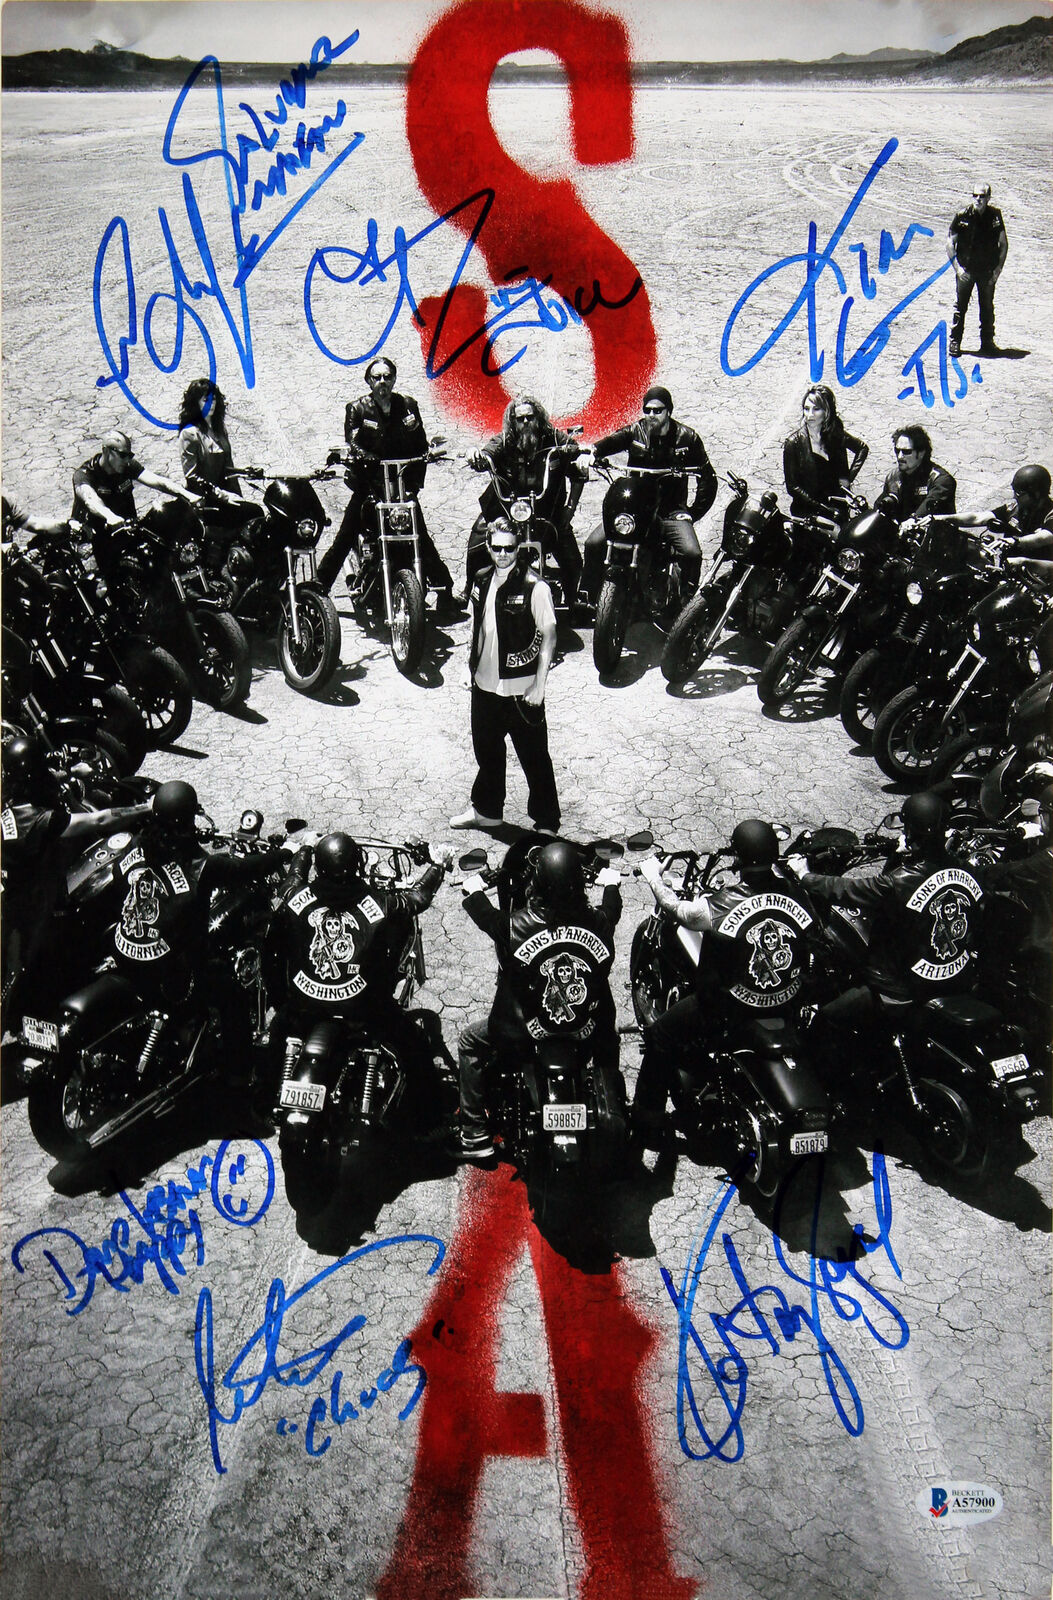 Sons of Anarchy (8) Segal, Coates, Rossi, Rivera Signed 12x18 Photo Poster painting BAS #A57900